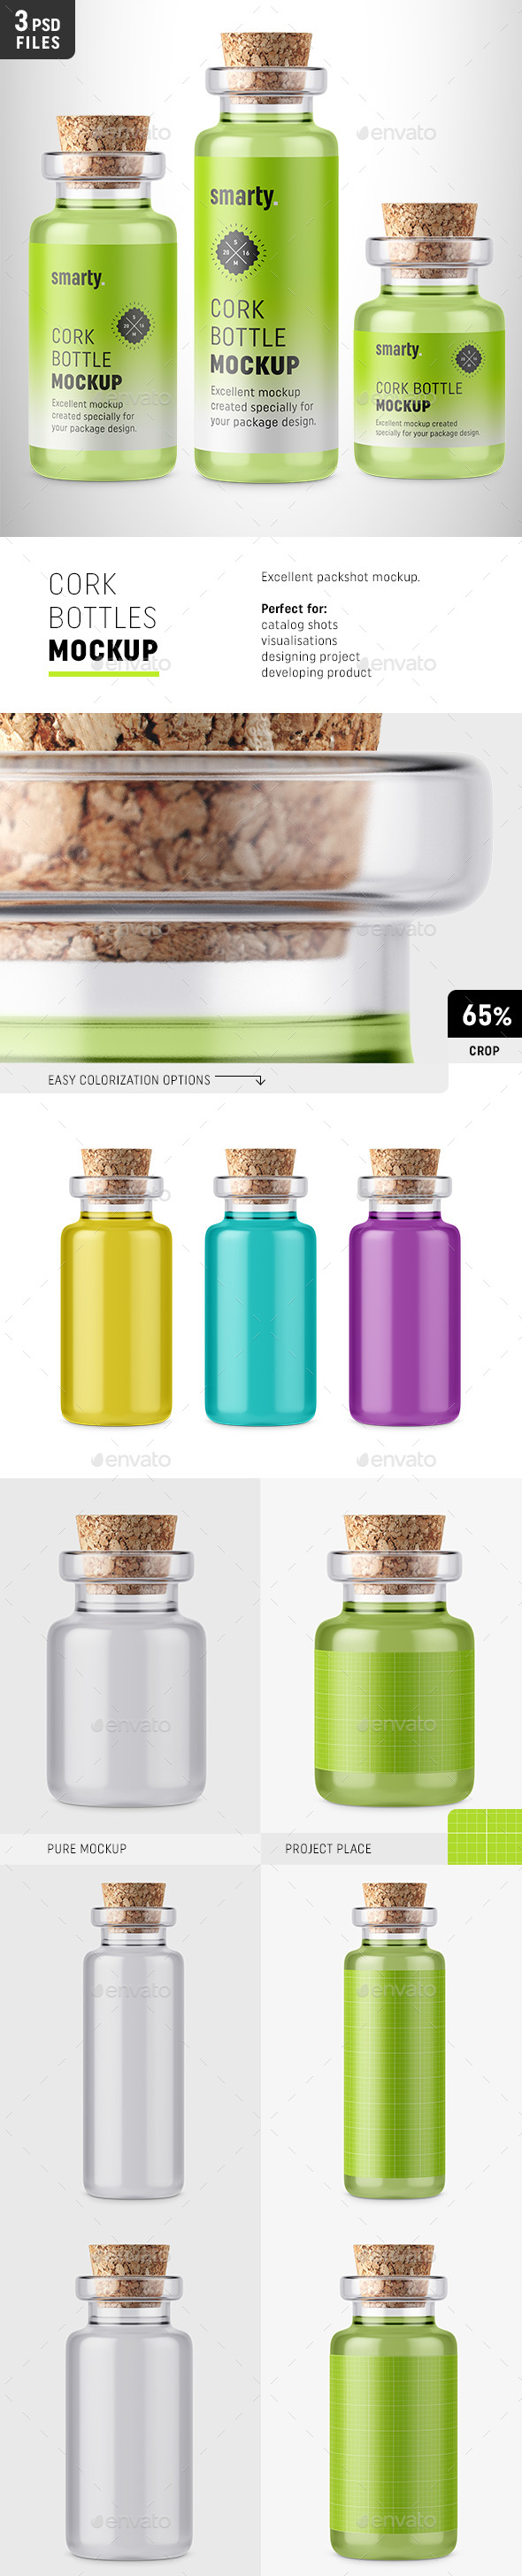 Glass Bottle with Cork Mockup